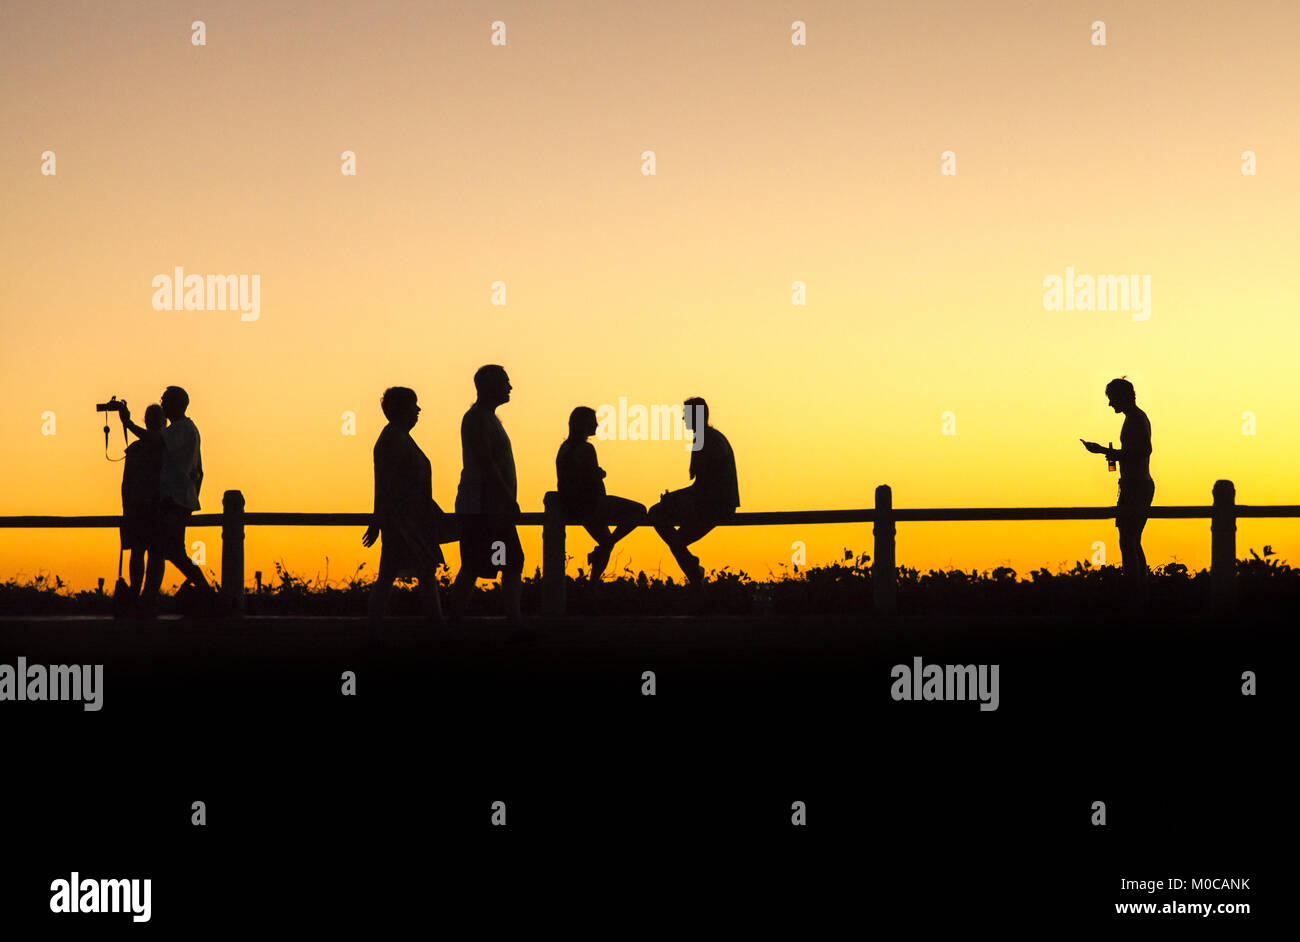 Silhouettes at sunset. Cable beach, Broome, Australia: An abstract  collection of figures as a passing parade, passing time on a beach.photo 1 Stock Photo